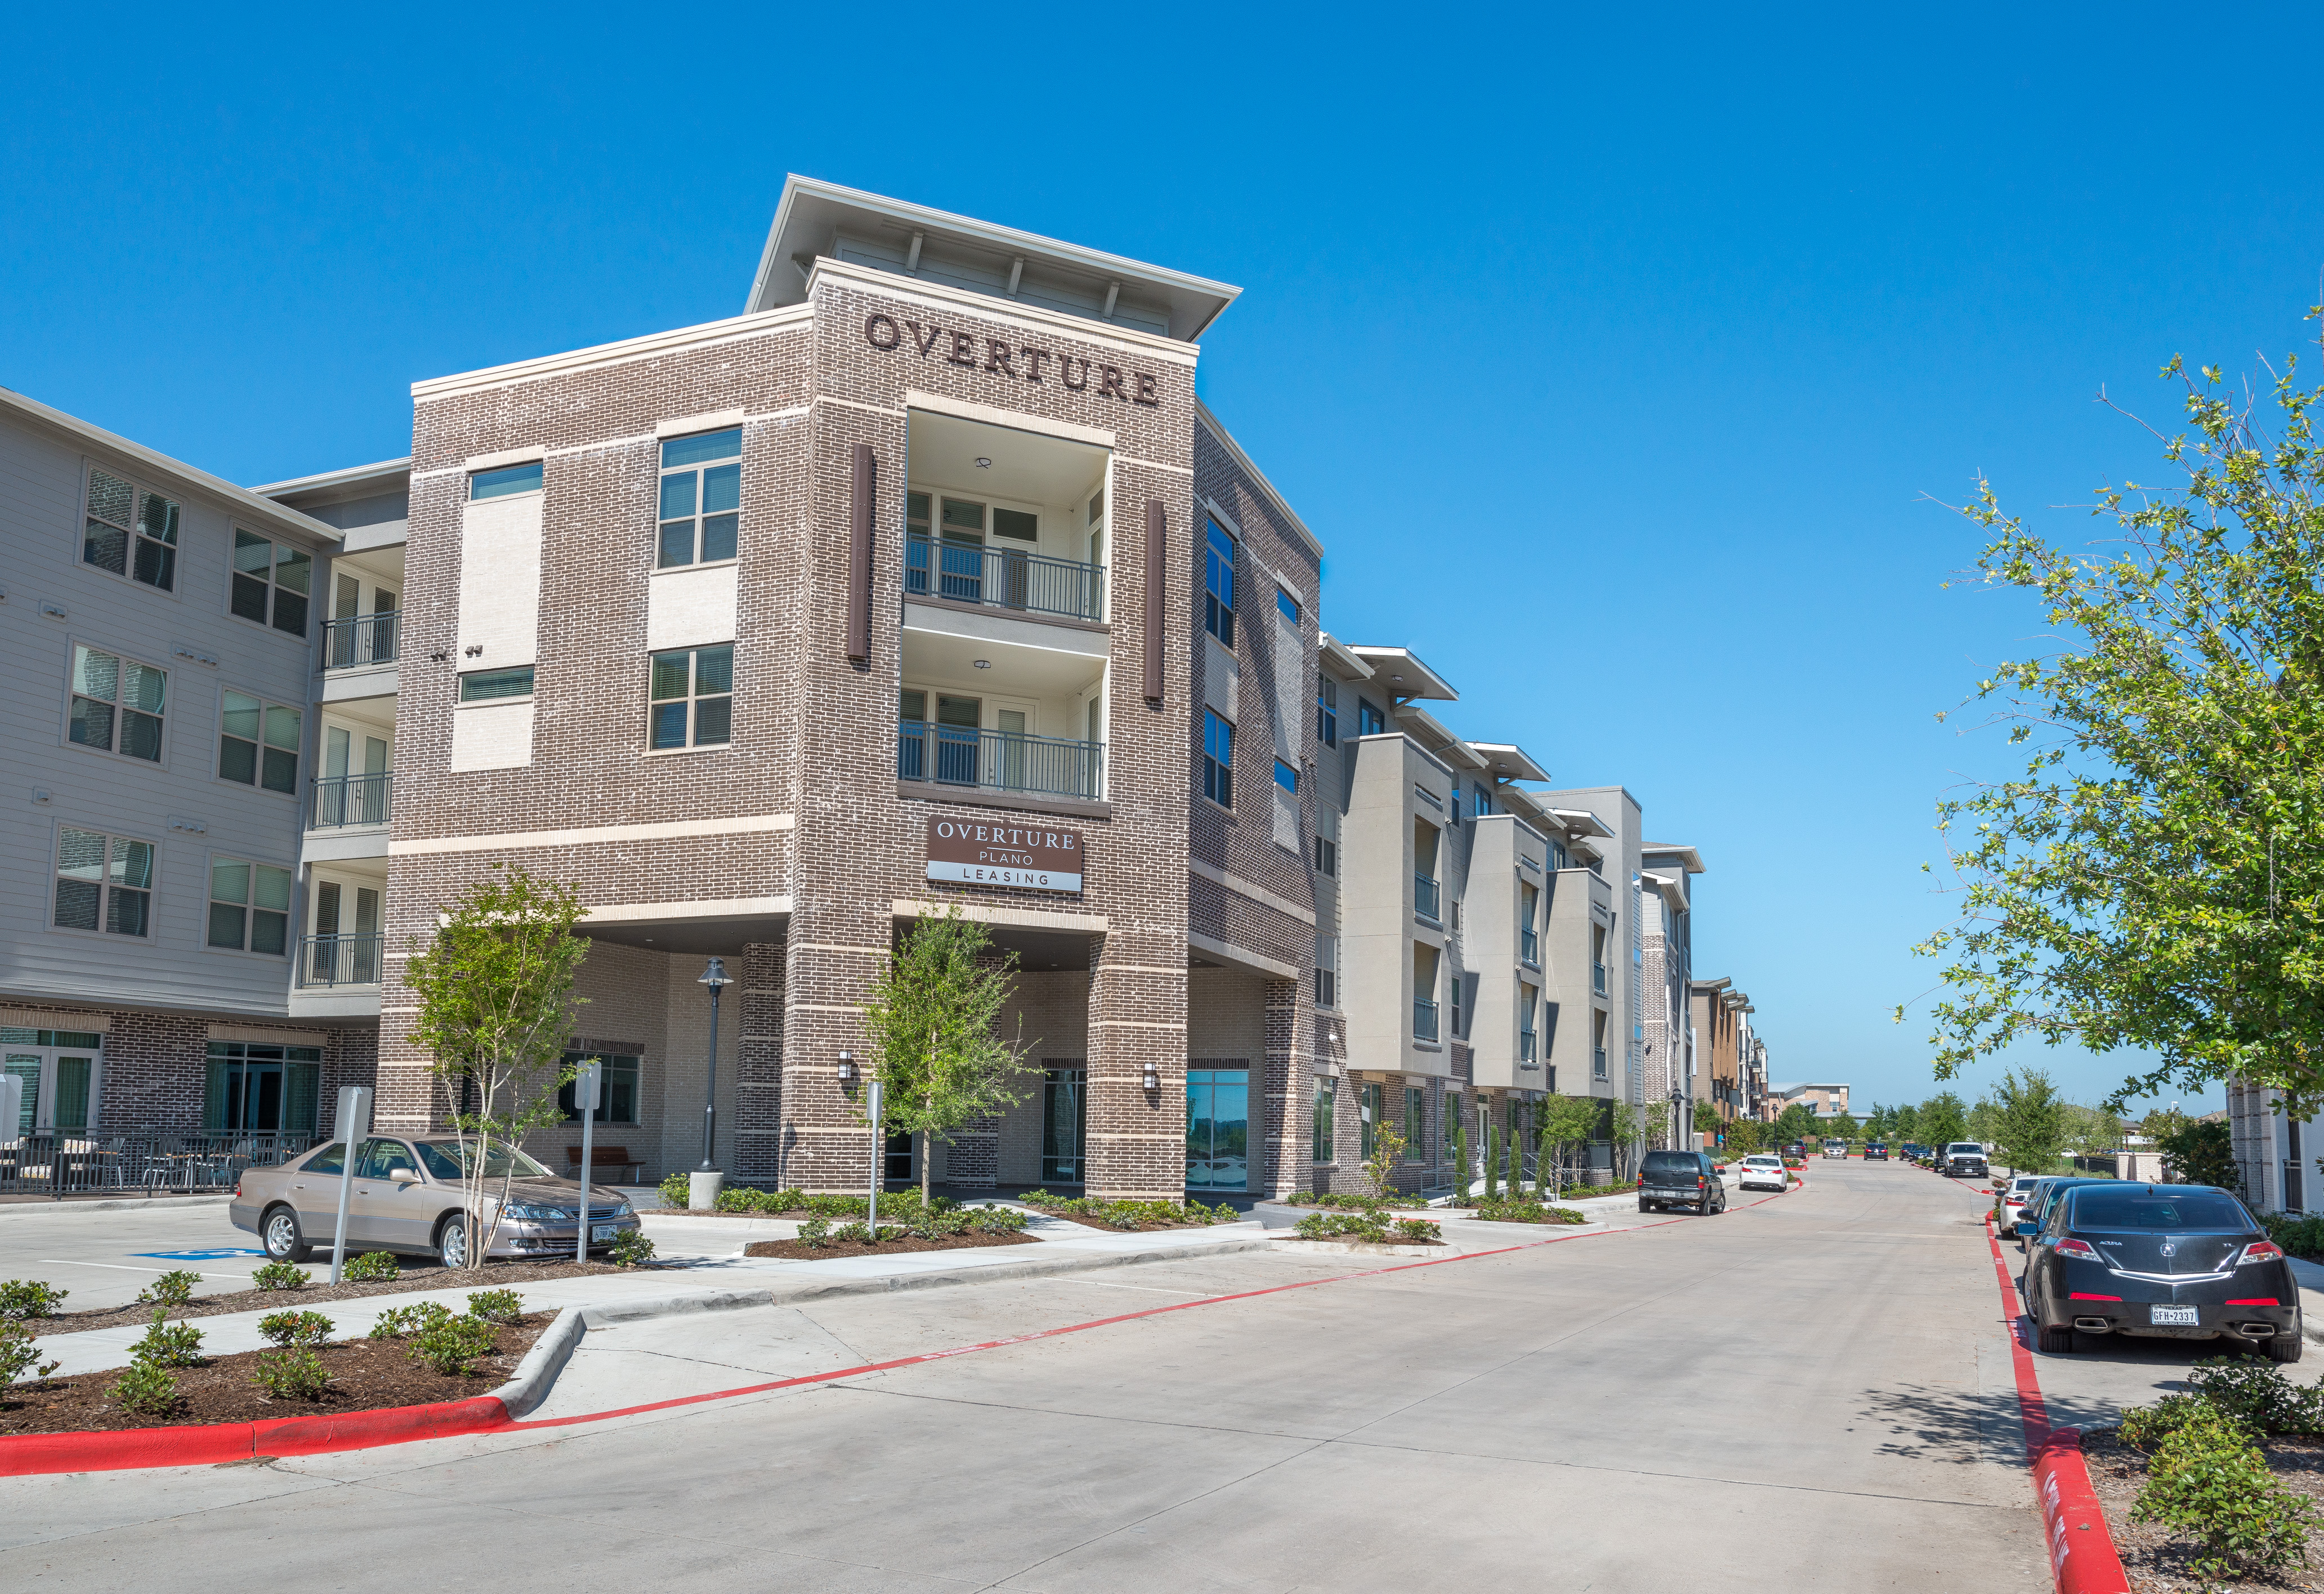 Overture Plano 55+ Apartment Homes image